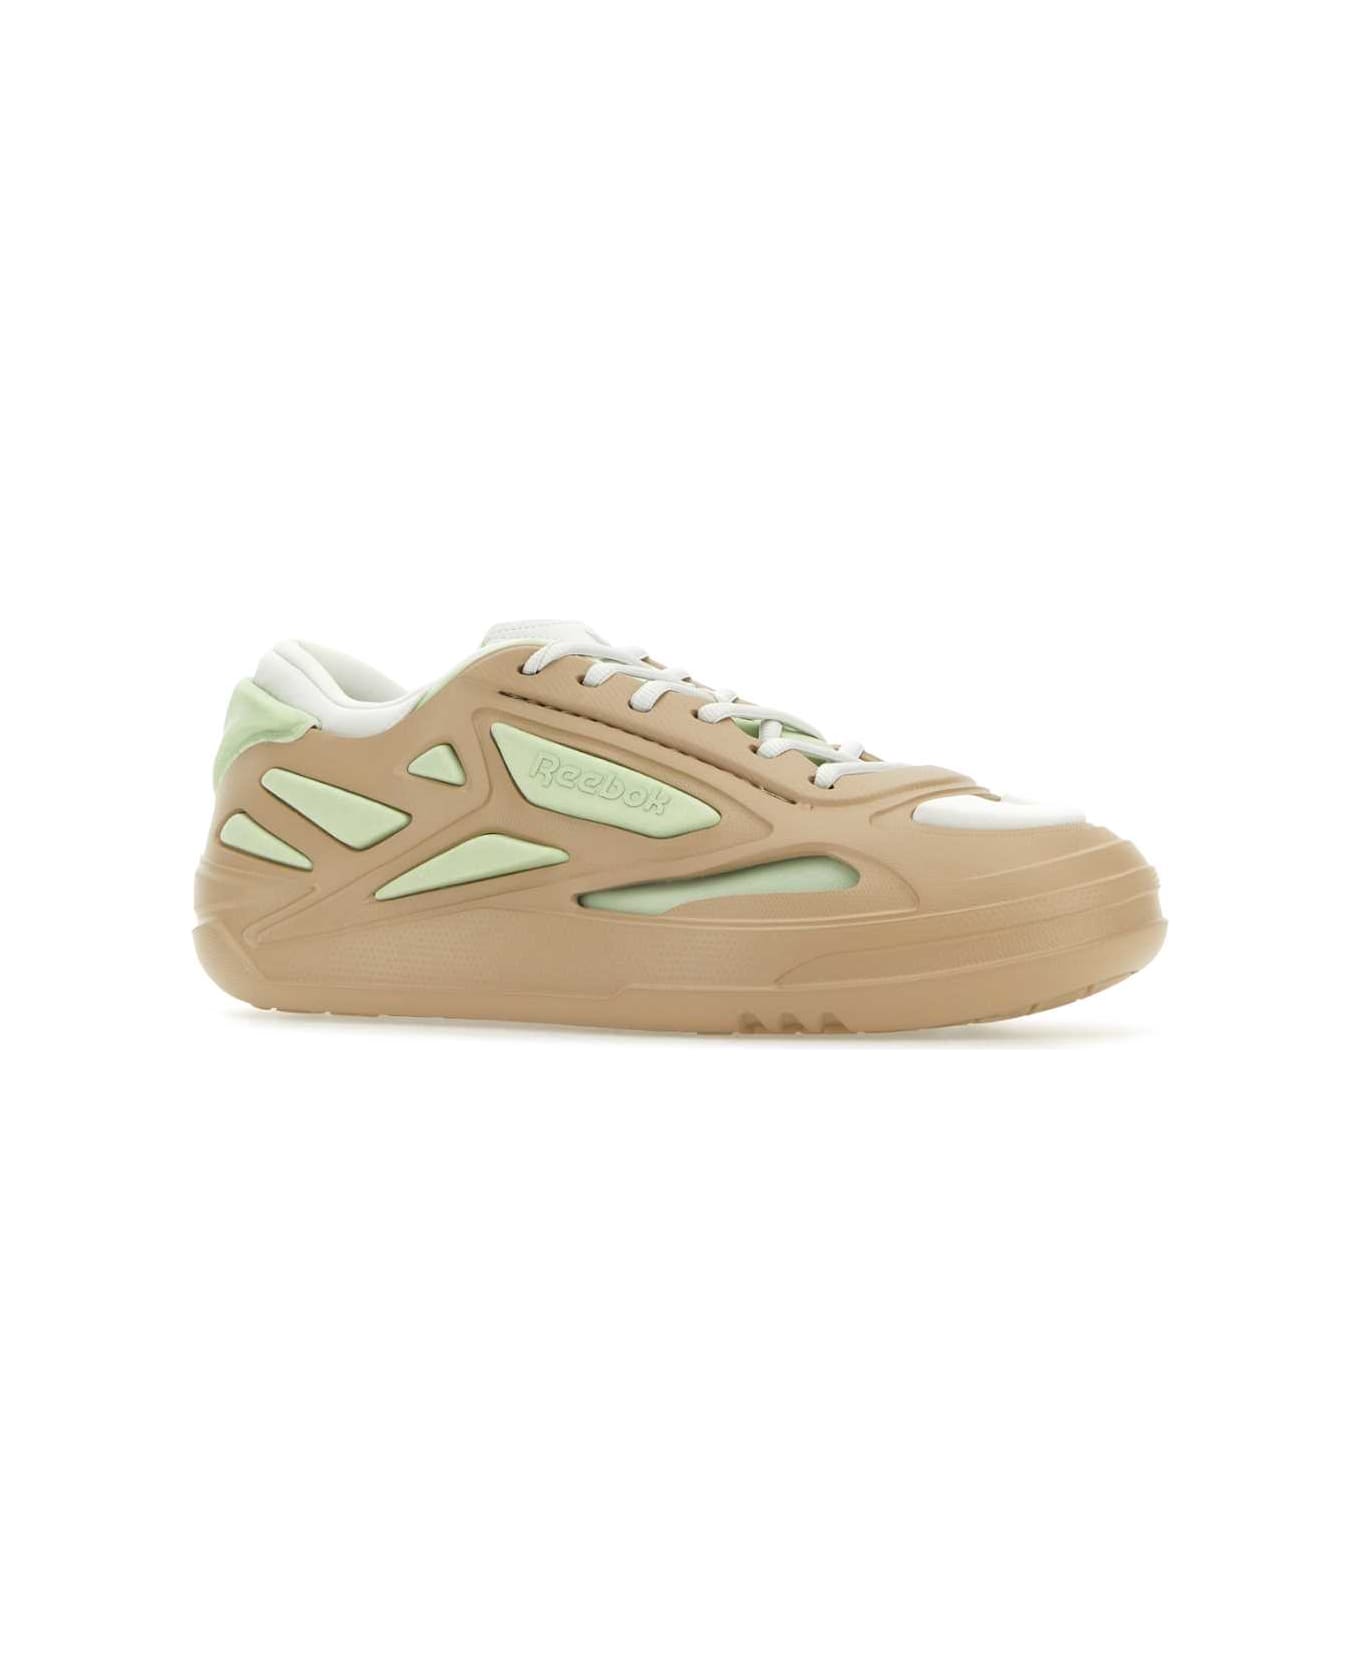 Reebok Multicolor Fabric And Rubber Future Club C Sneakers - BEIGELIG